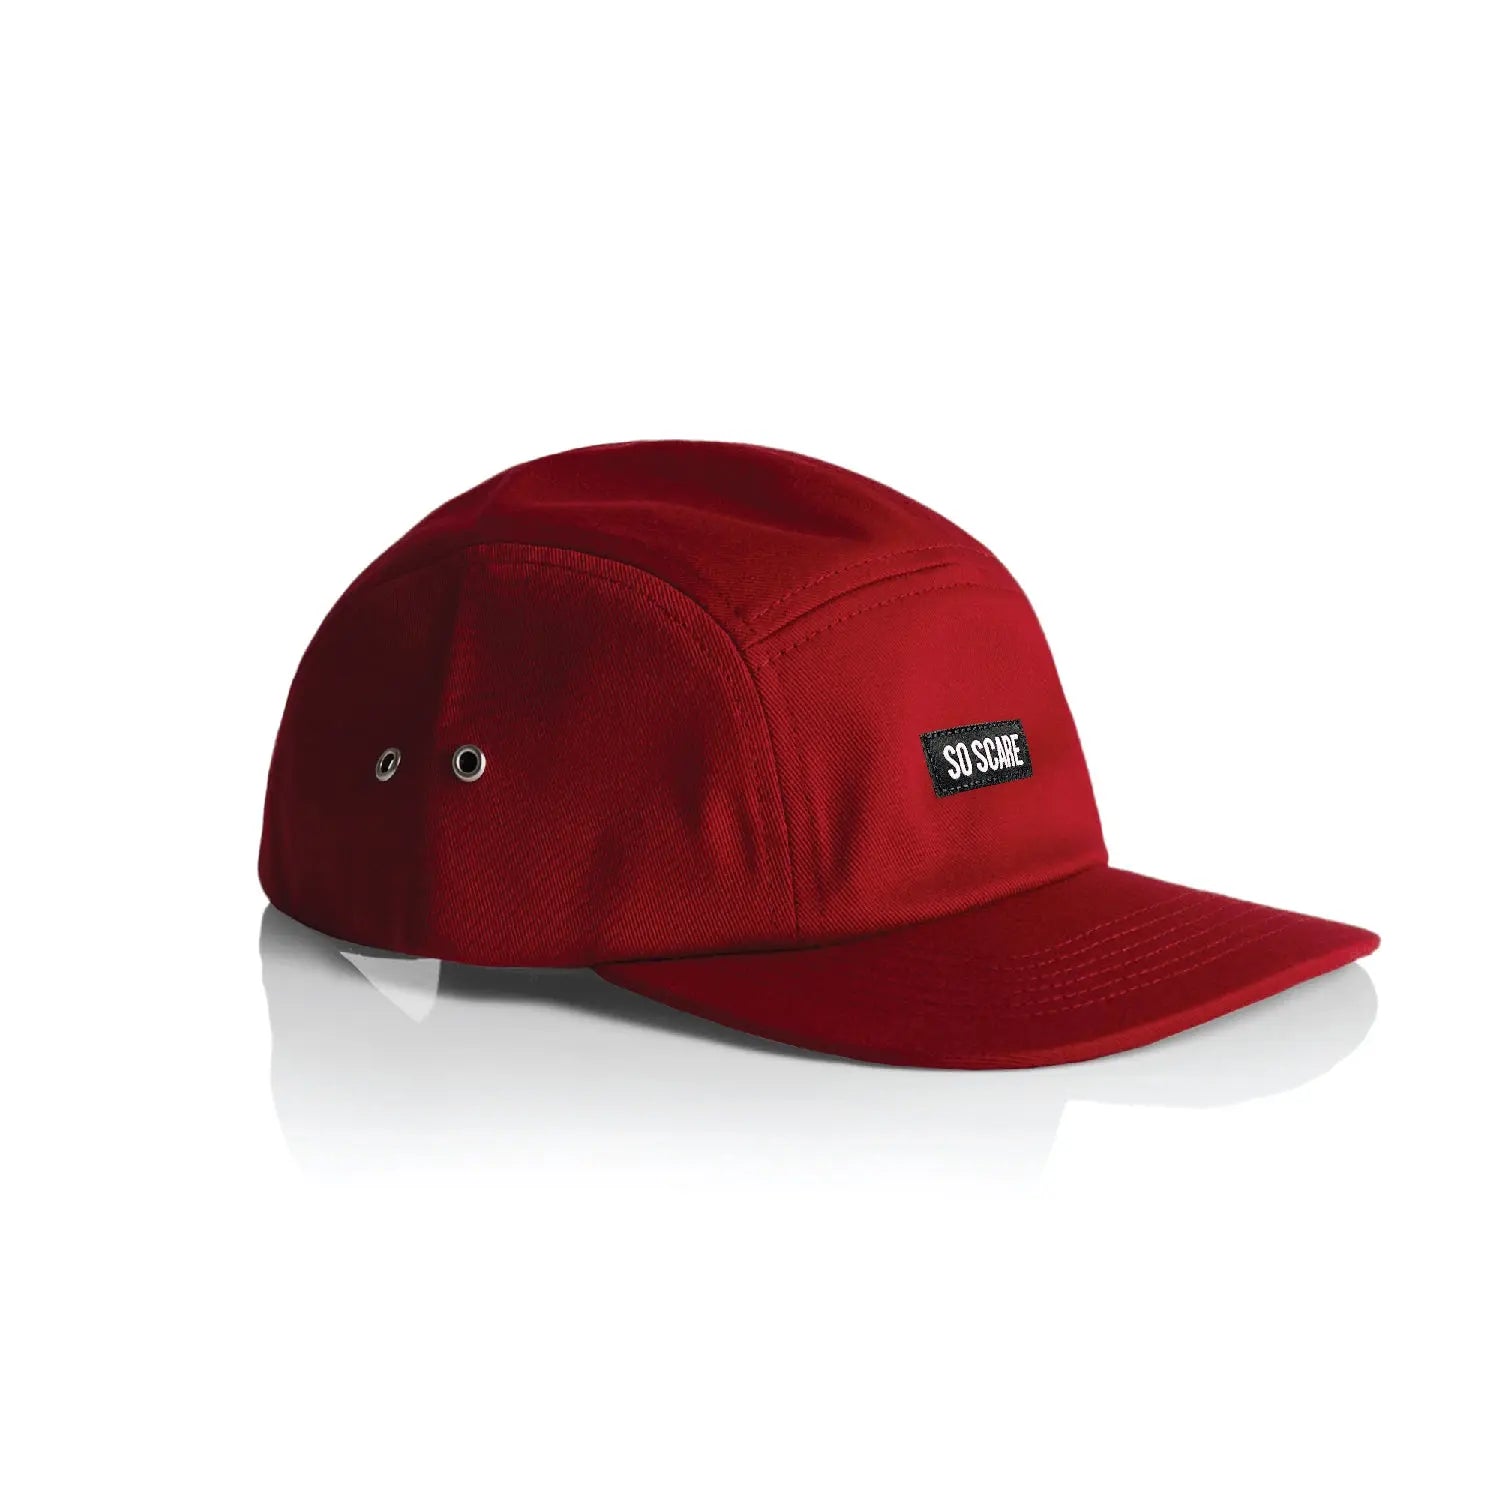 5 PANEL HAT - RED SO SCARE SOCIAL CLUB